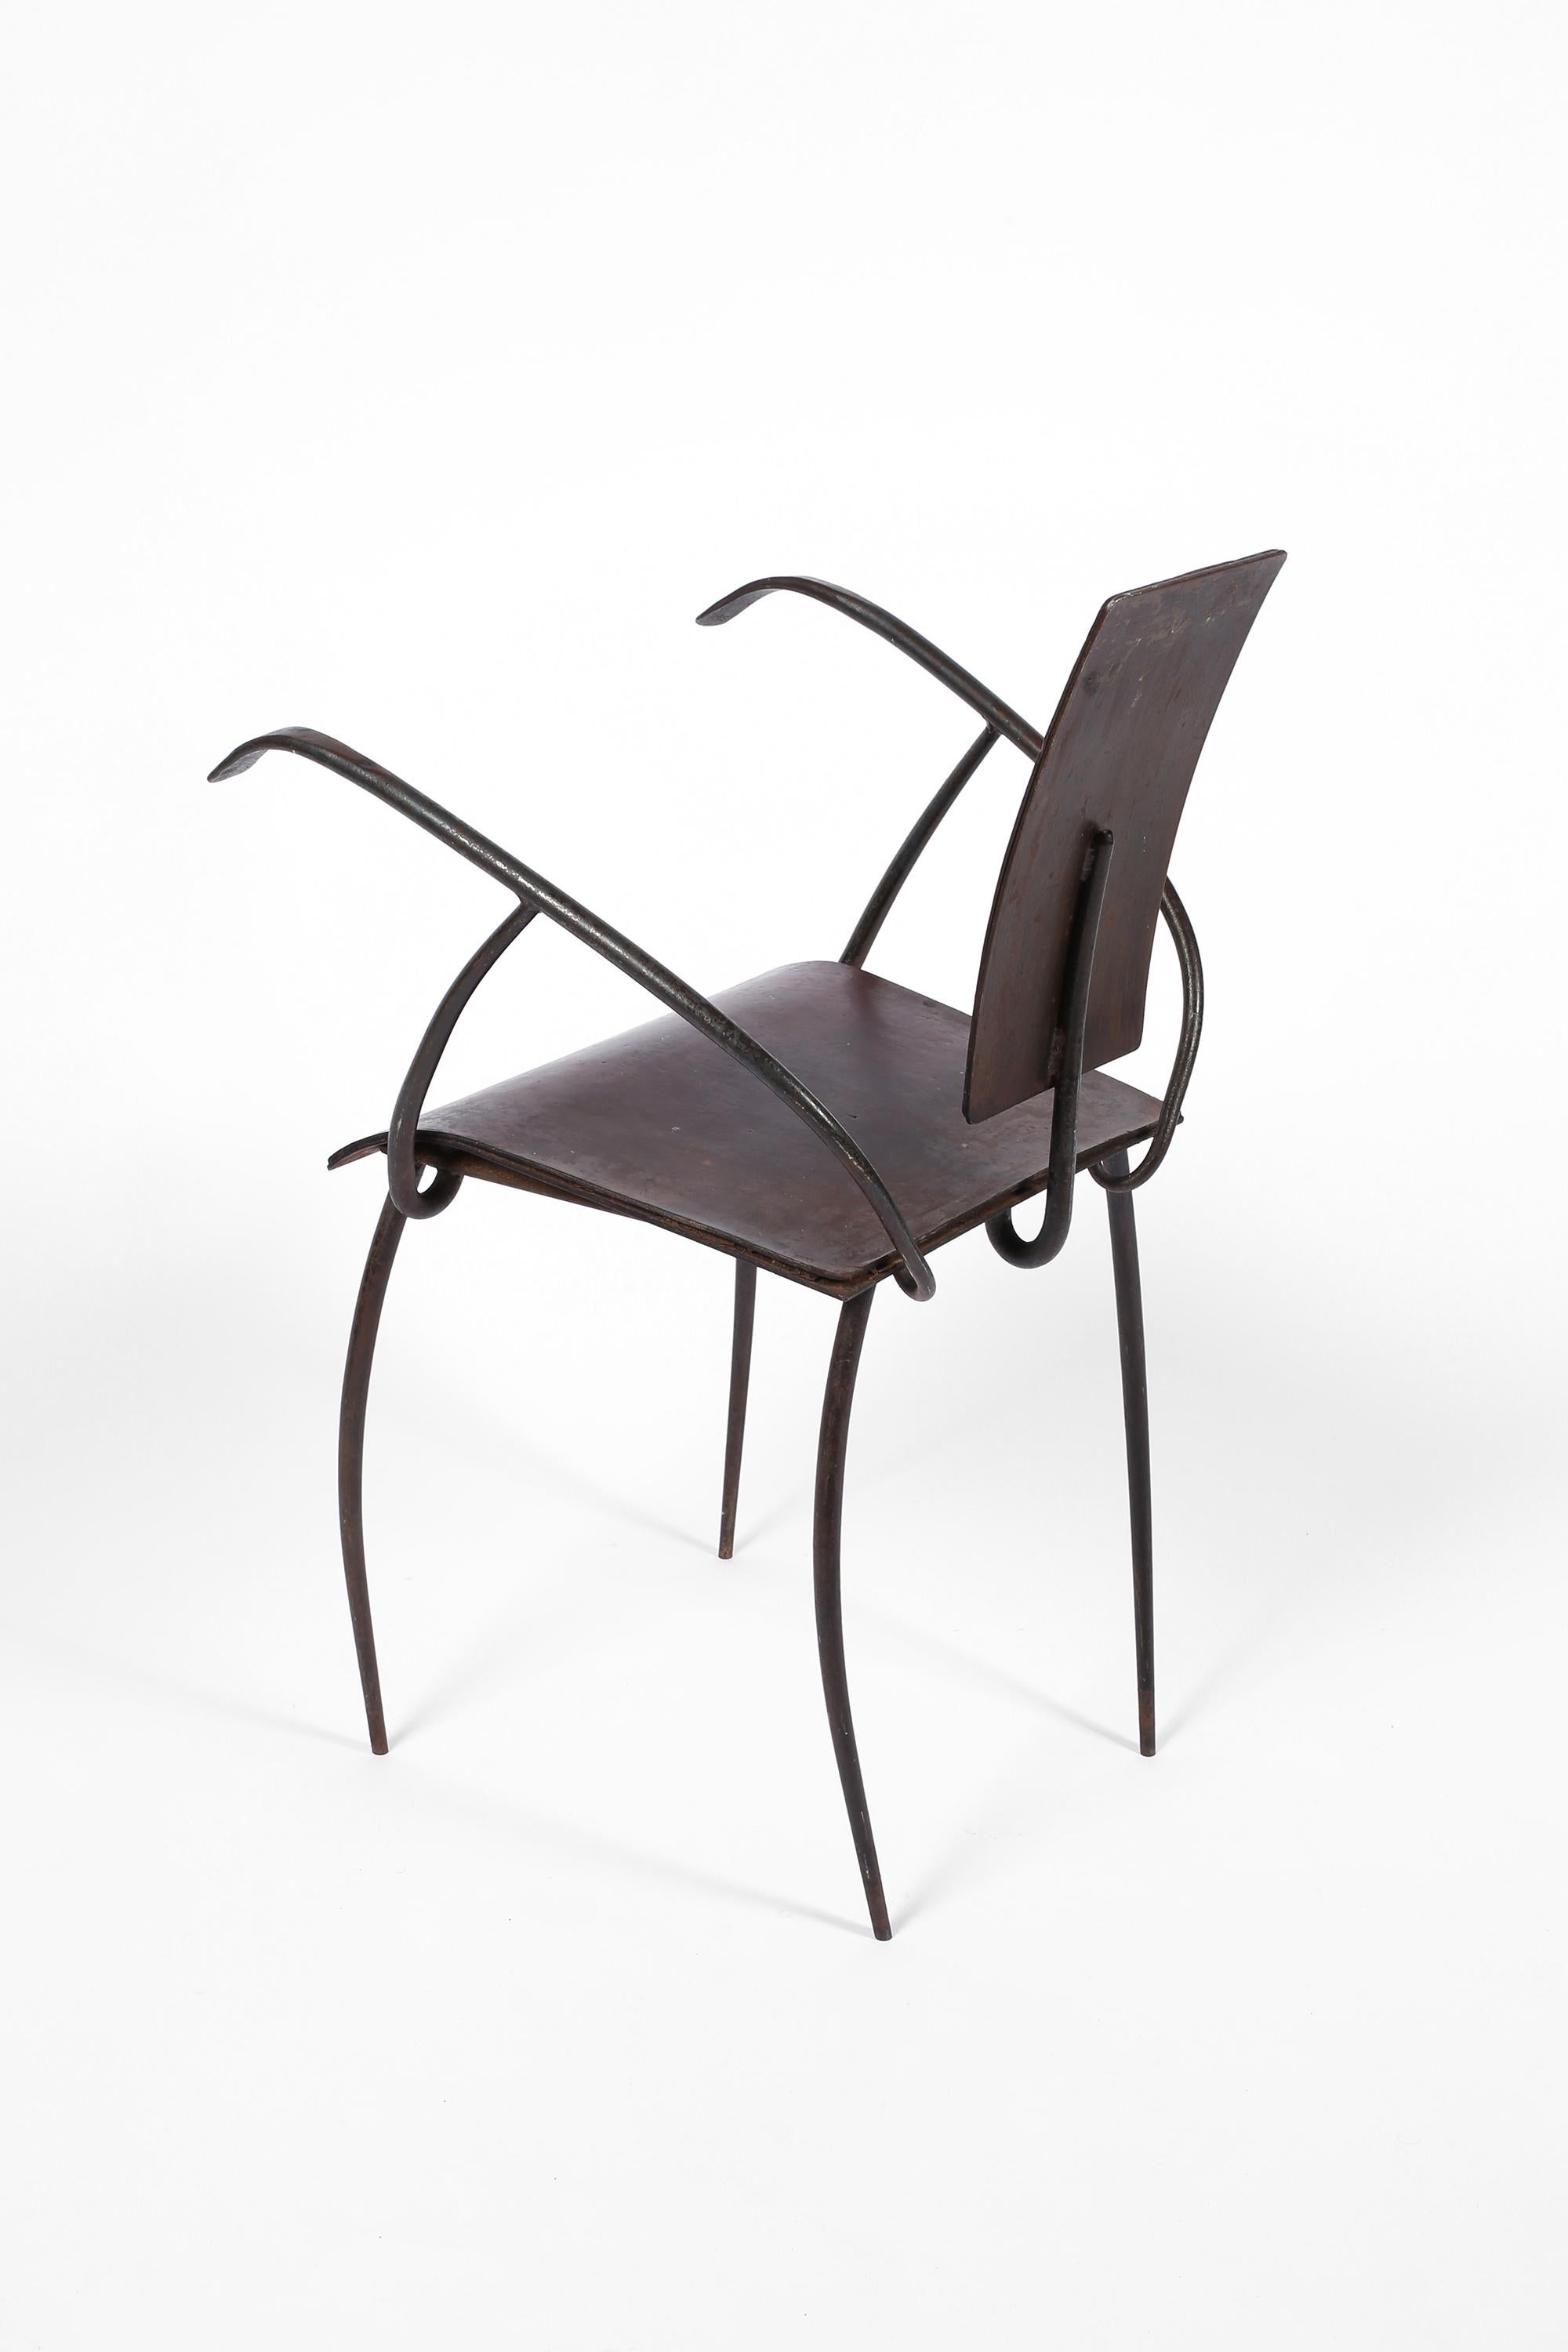 Artisanal French Modernist Iron and Leather Chair Midcentury Modern In Good Condition For Sale In London, GB